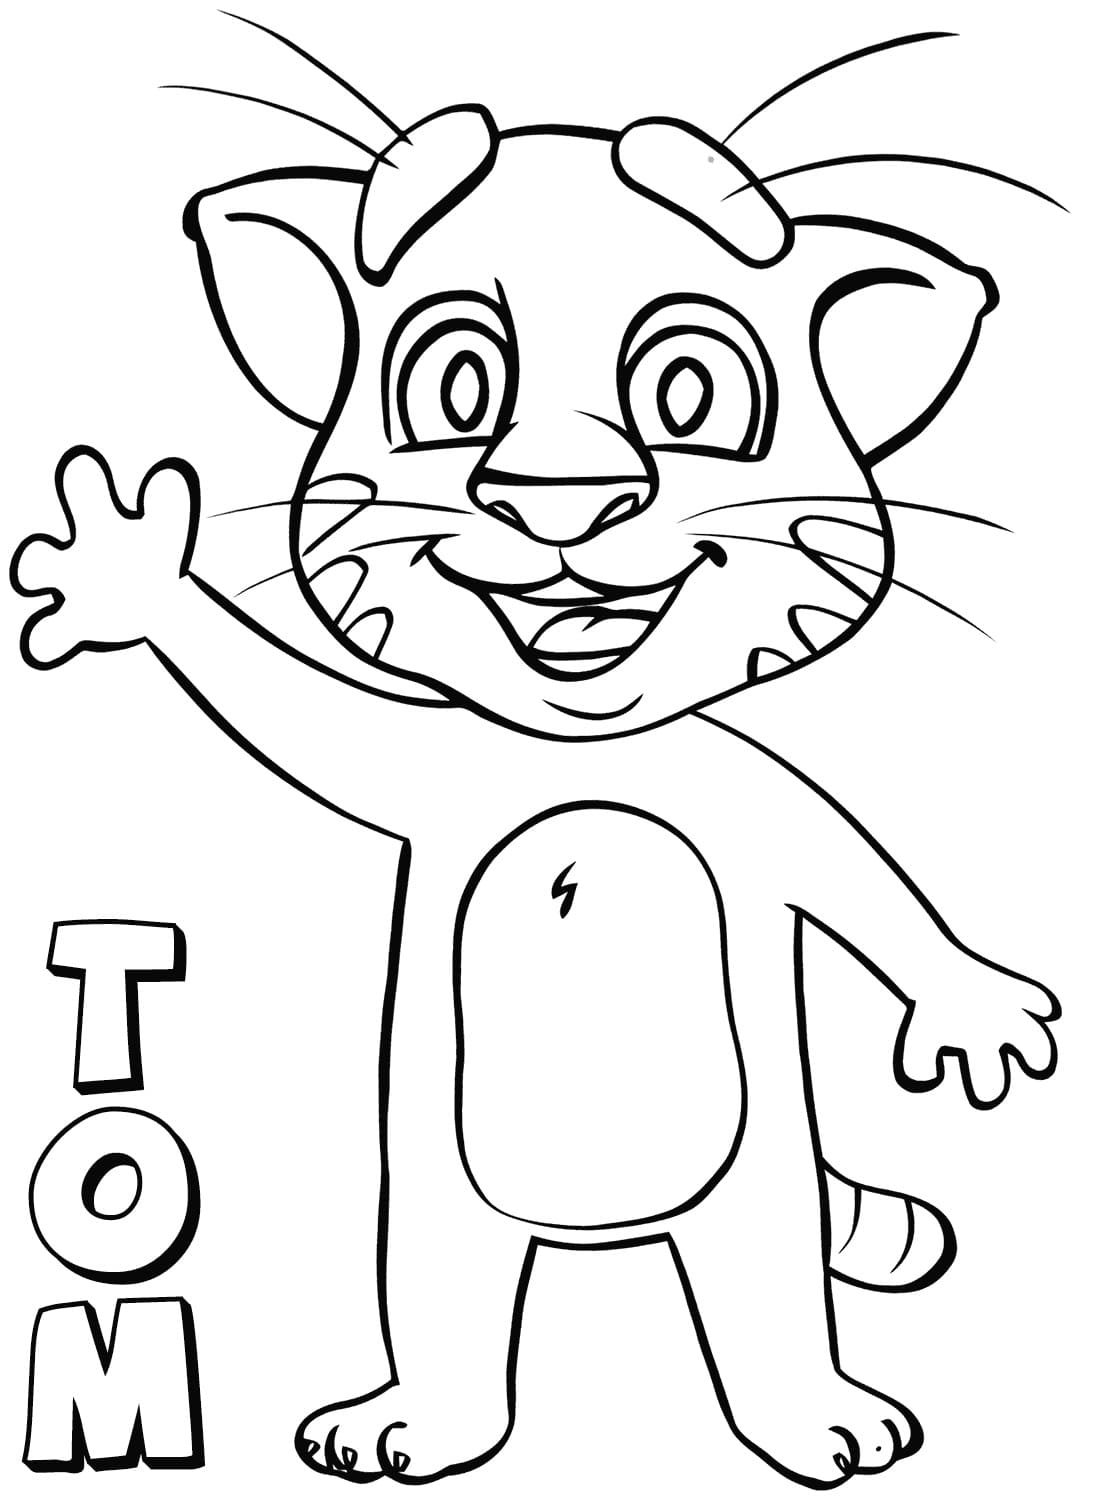 Talking Tom Coloring Pages 50 Pictures Free Printable.